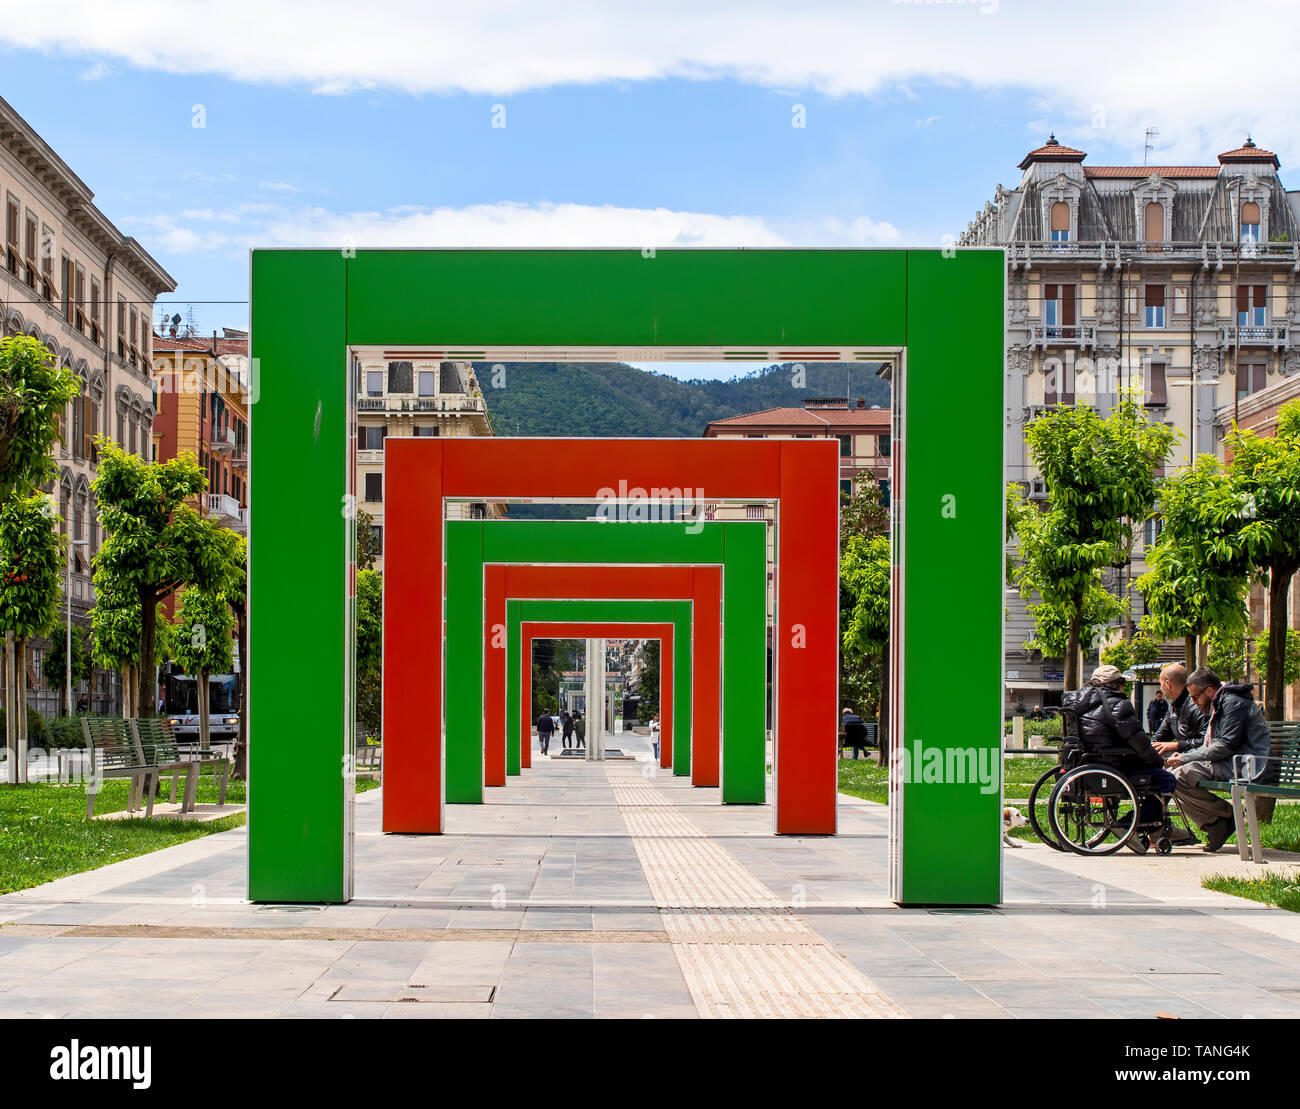 LA SPEZIA, ITALY, MAY 15, 2019: Piazza Verde in the centre of La Spezia town with red and green arches by Daniel Buren. Liguria, Italy. Old meets new. Stock Photo